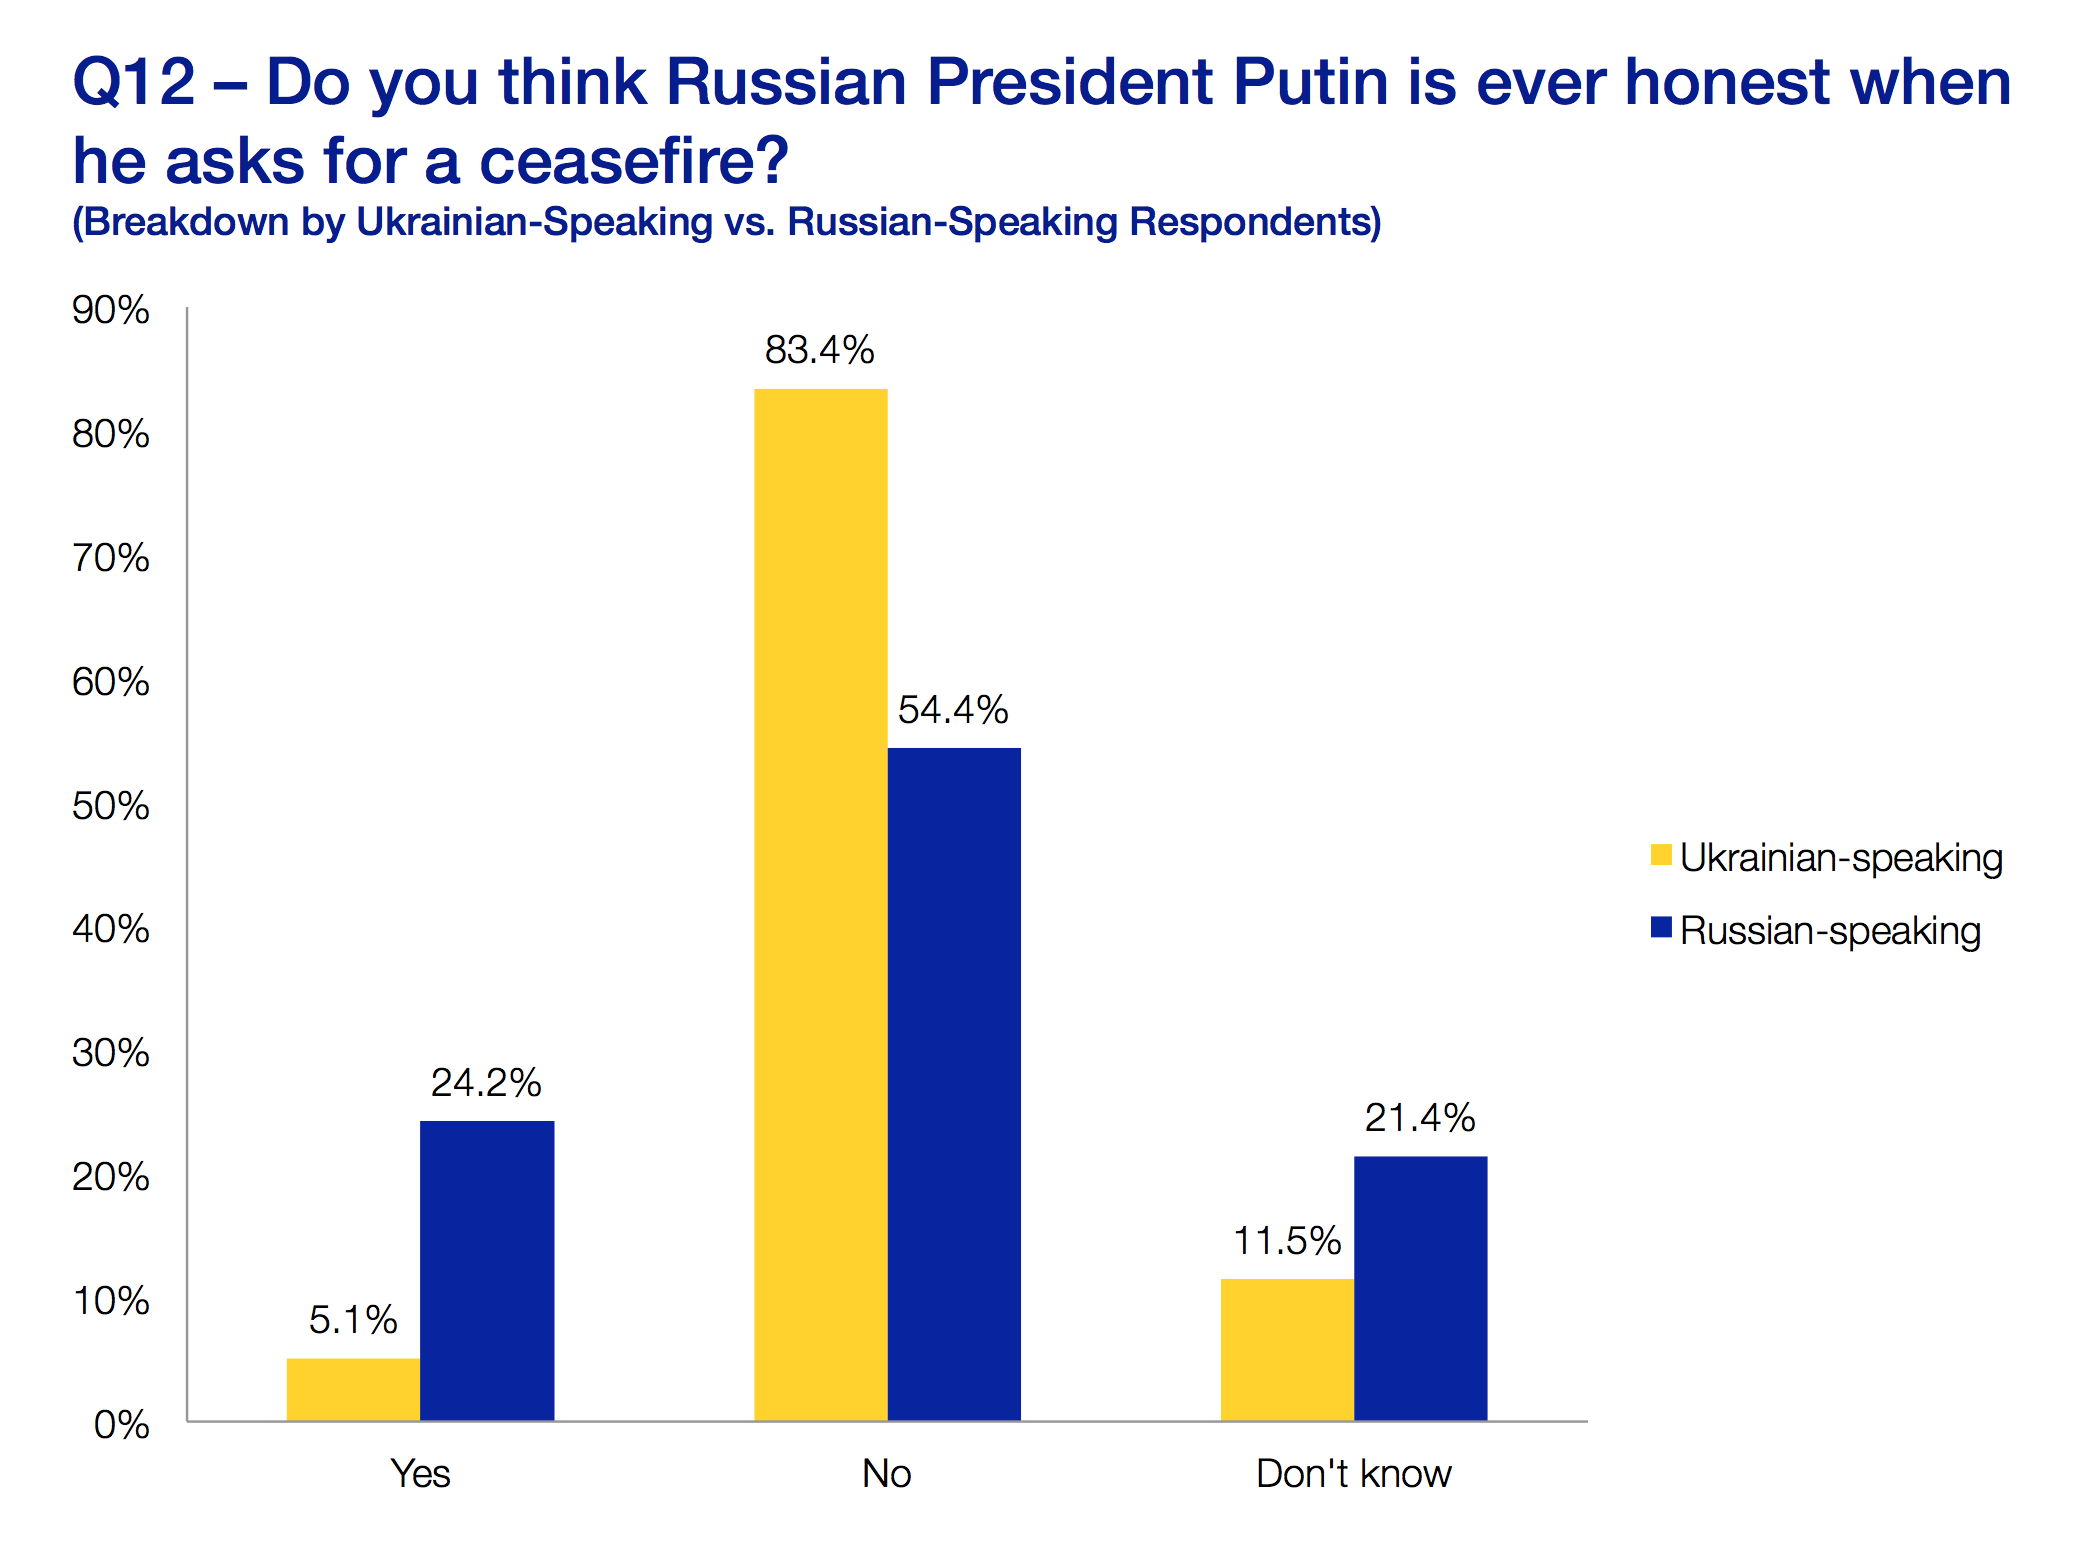 Do you think Russian President Putin is ever honest when he asks for a ceasefire?